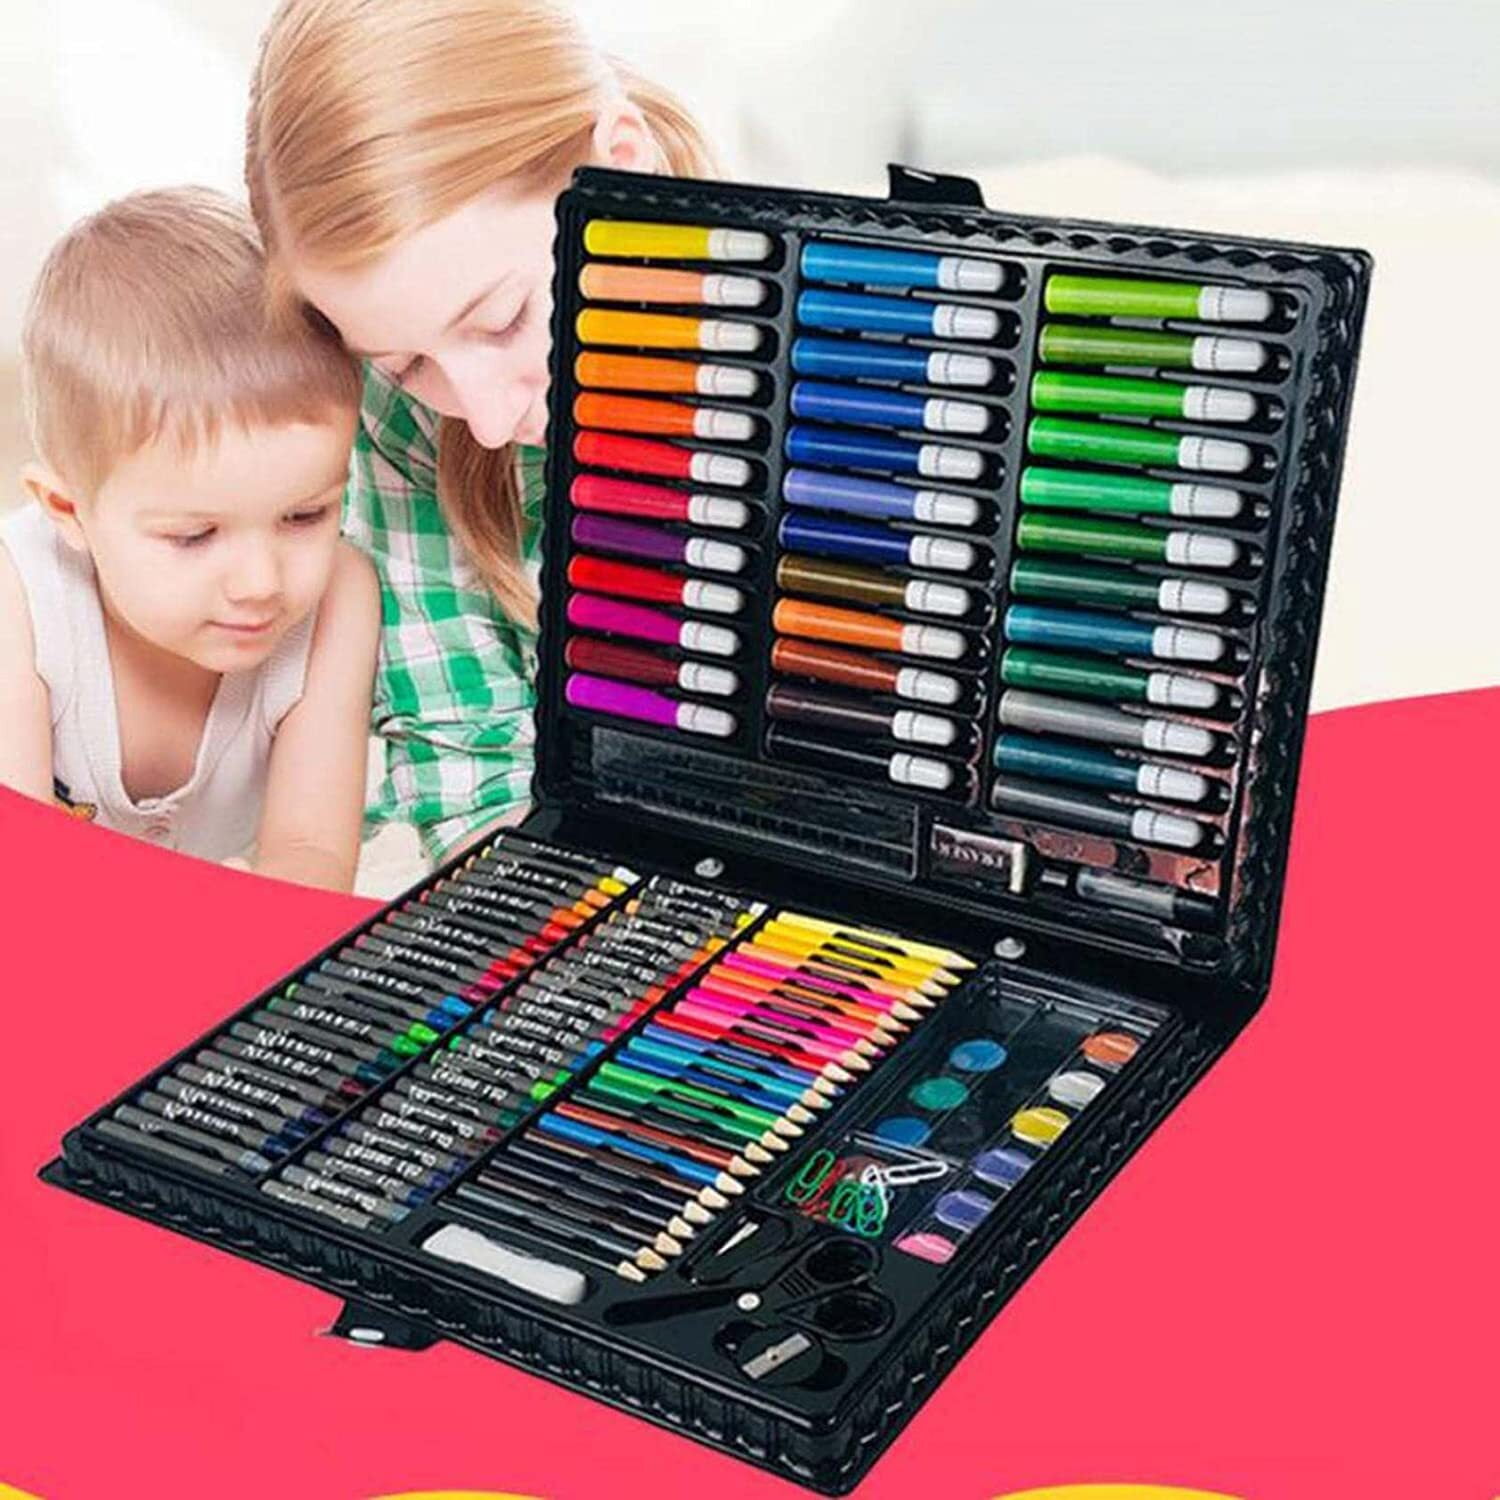 GoXteam 150-Pieces Deluxe Art Set for Kids, Drawing Art Supplies in a  Plastic Case, Great Gift for Kids Christmas New Year (Black)